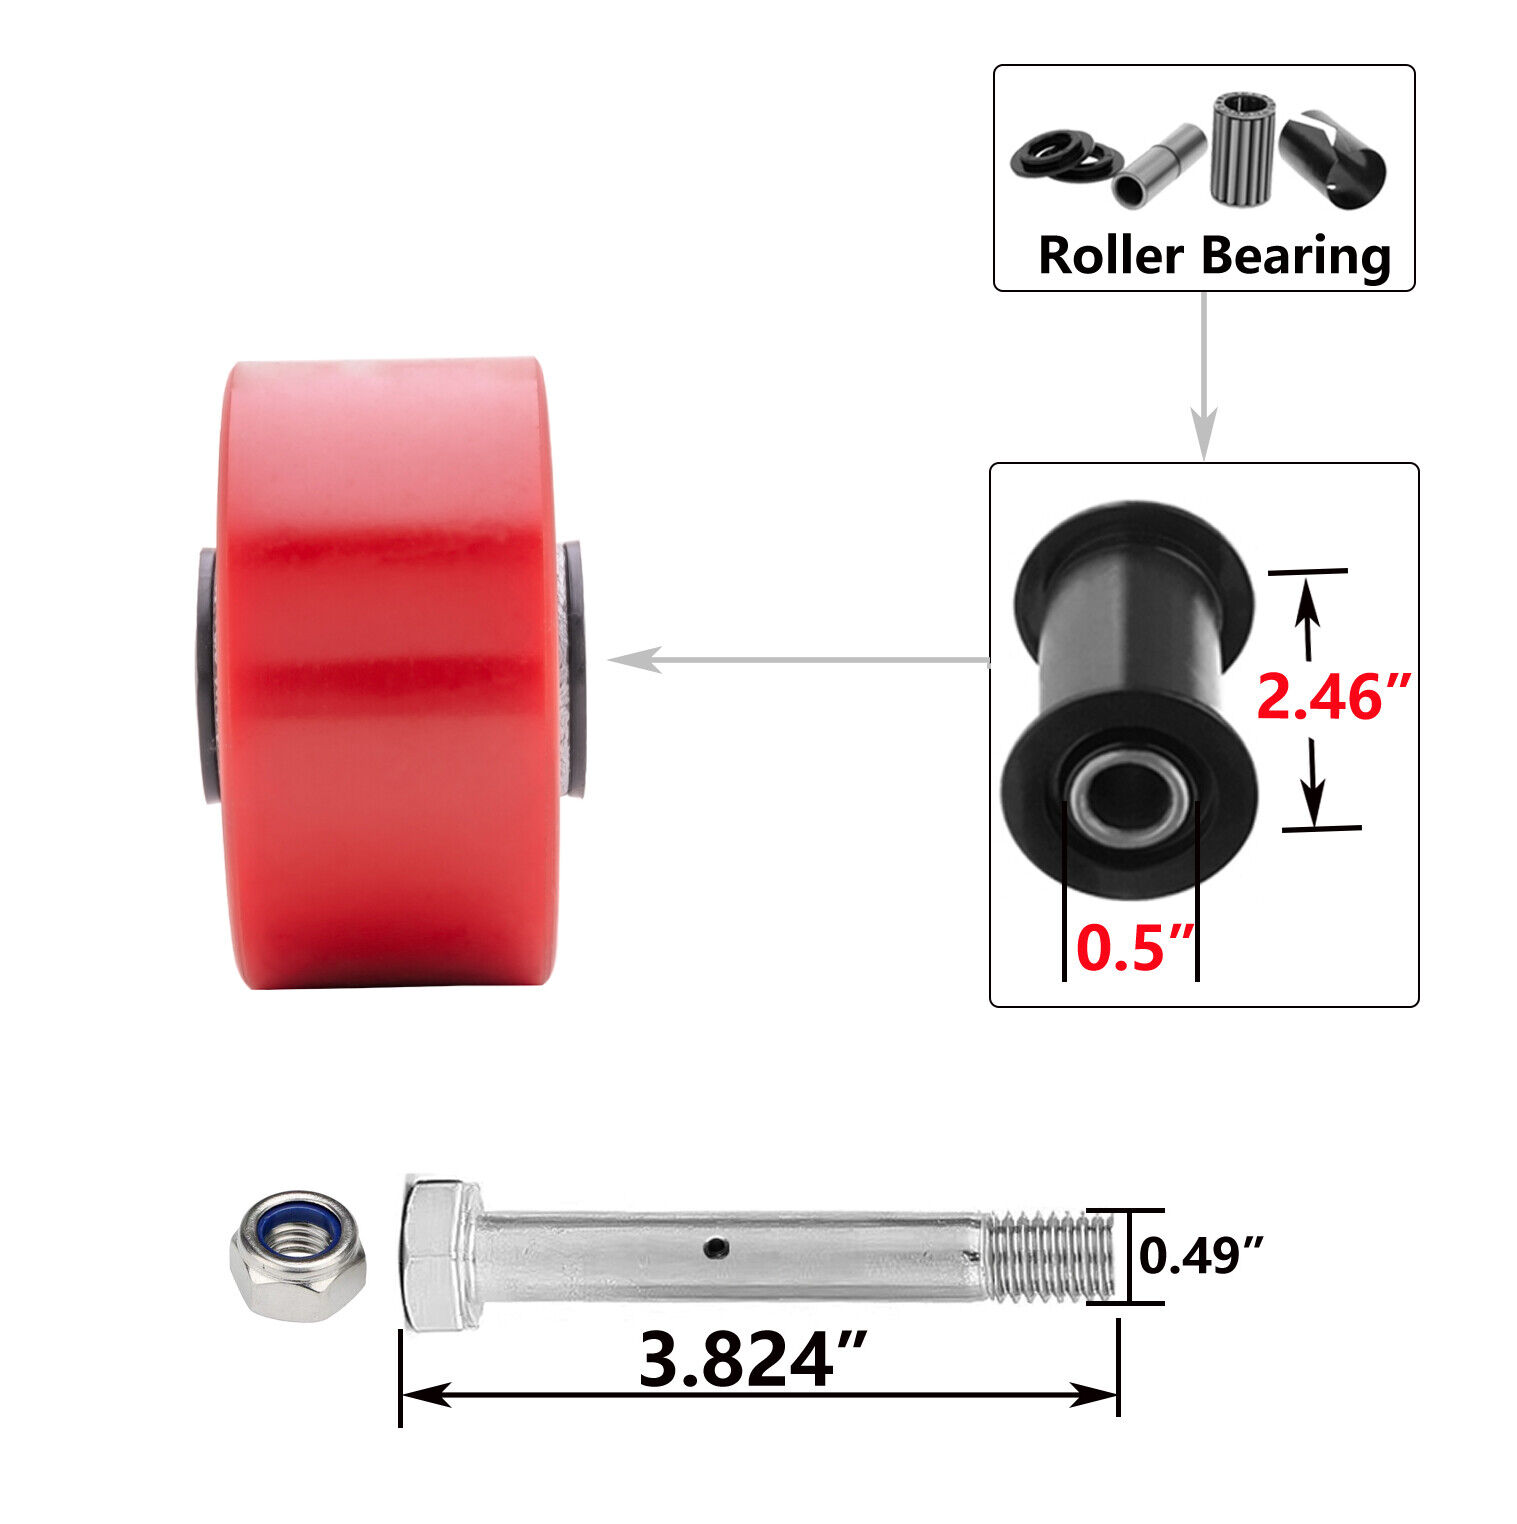 4"X 2" Heavy Duty Casters - Polyurethane Caster with Capacity up to 800-3000 LB